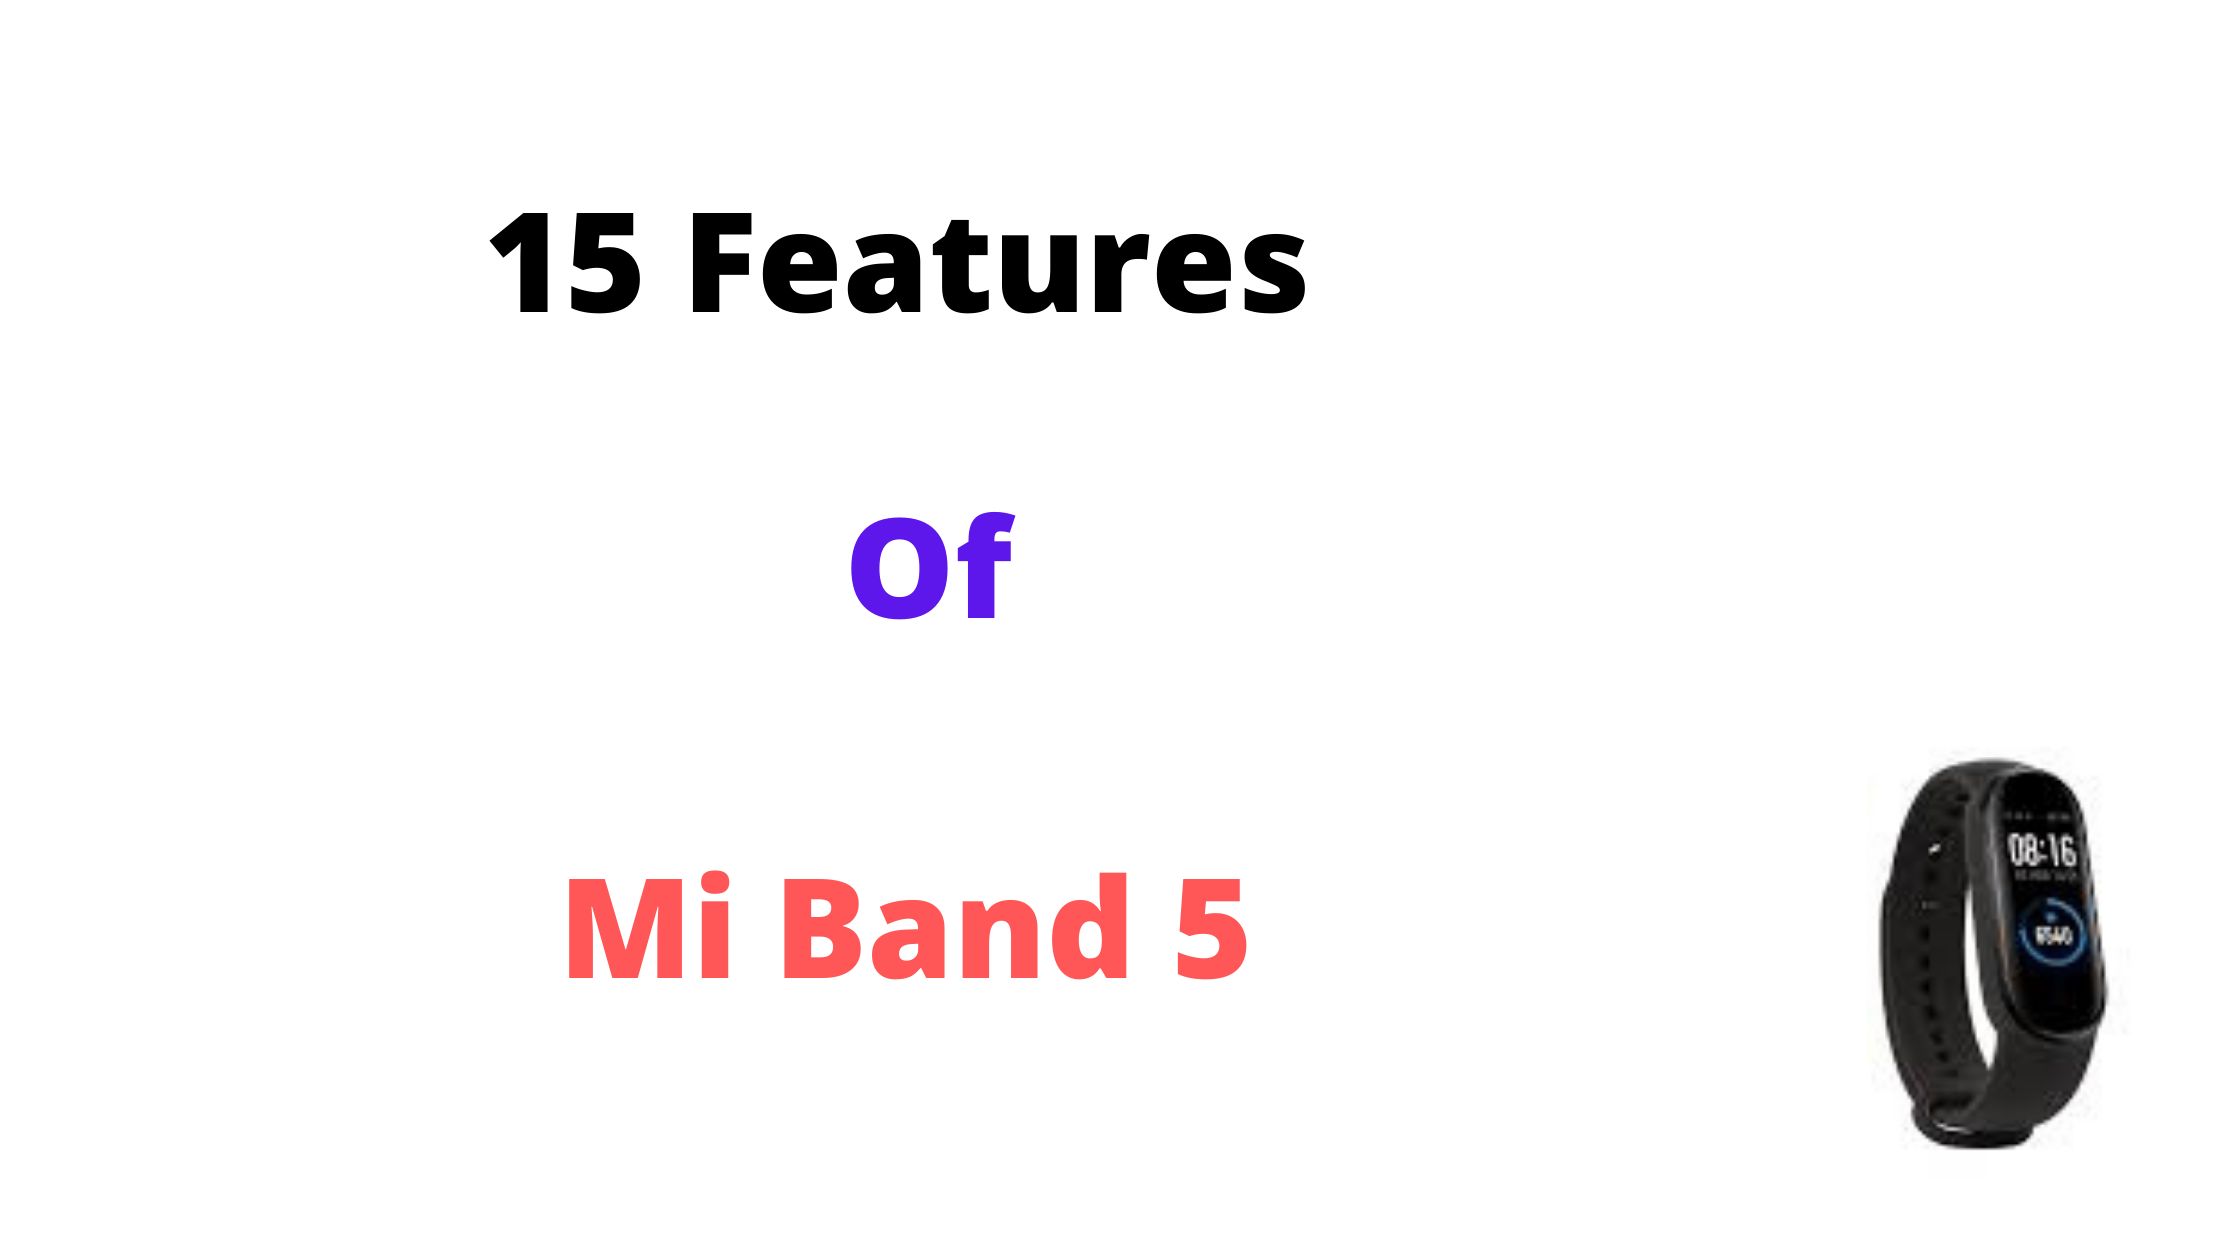 15 Features Of MiBand 5